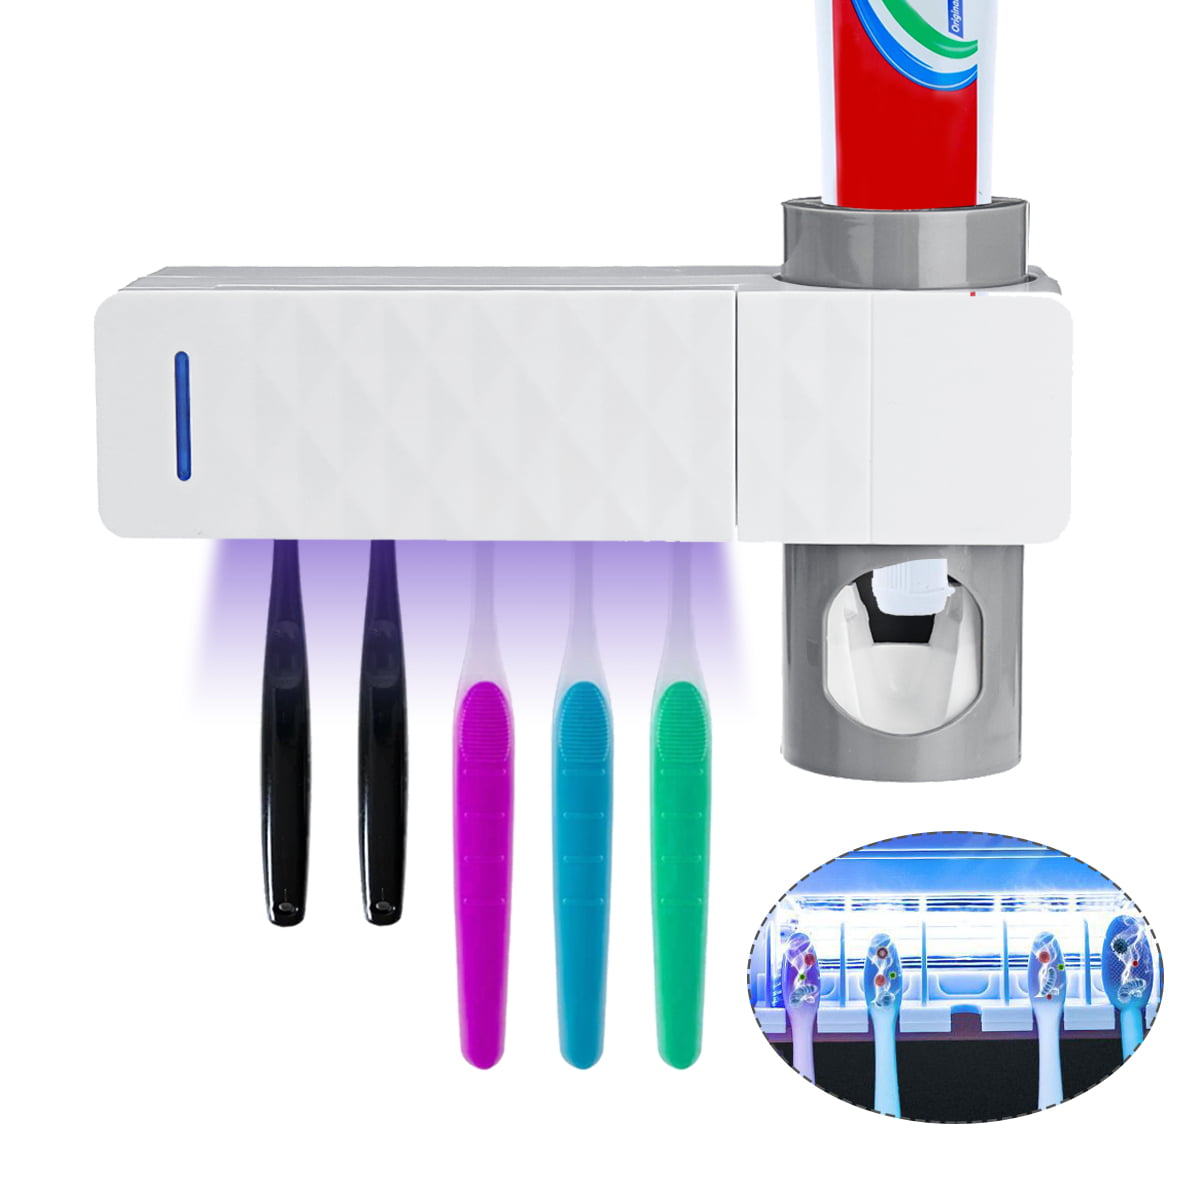 Automatic Toothpaste Dispenser,5 Toothbrush Sterilizer Holder with Sticker free Punching for Family ZENUTA Toothbrush Sterilizer,UV Toothbrush Sanitizer Holder 